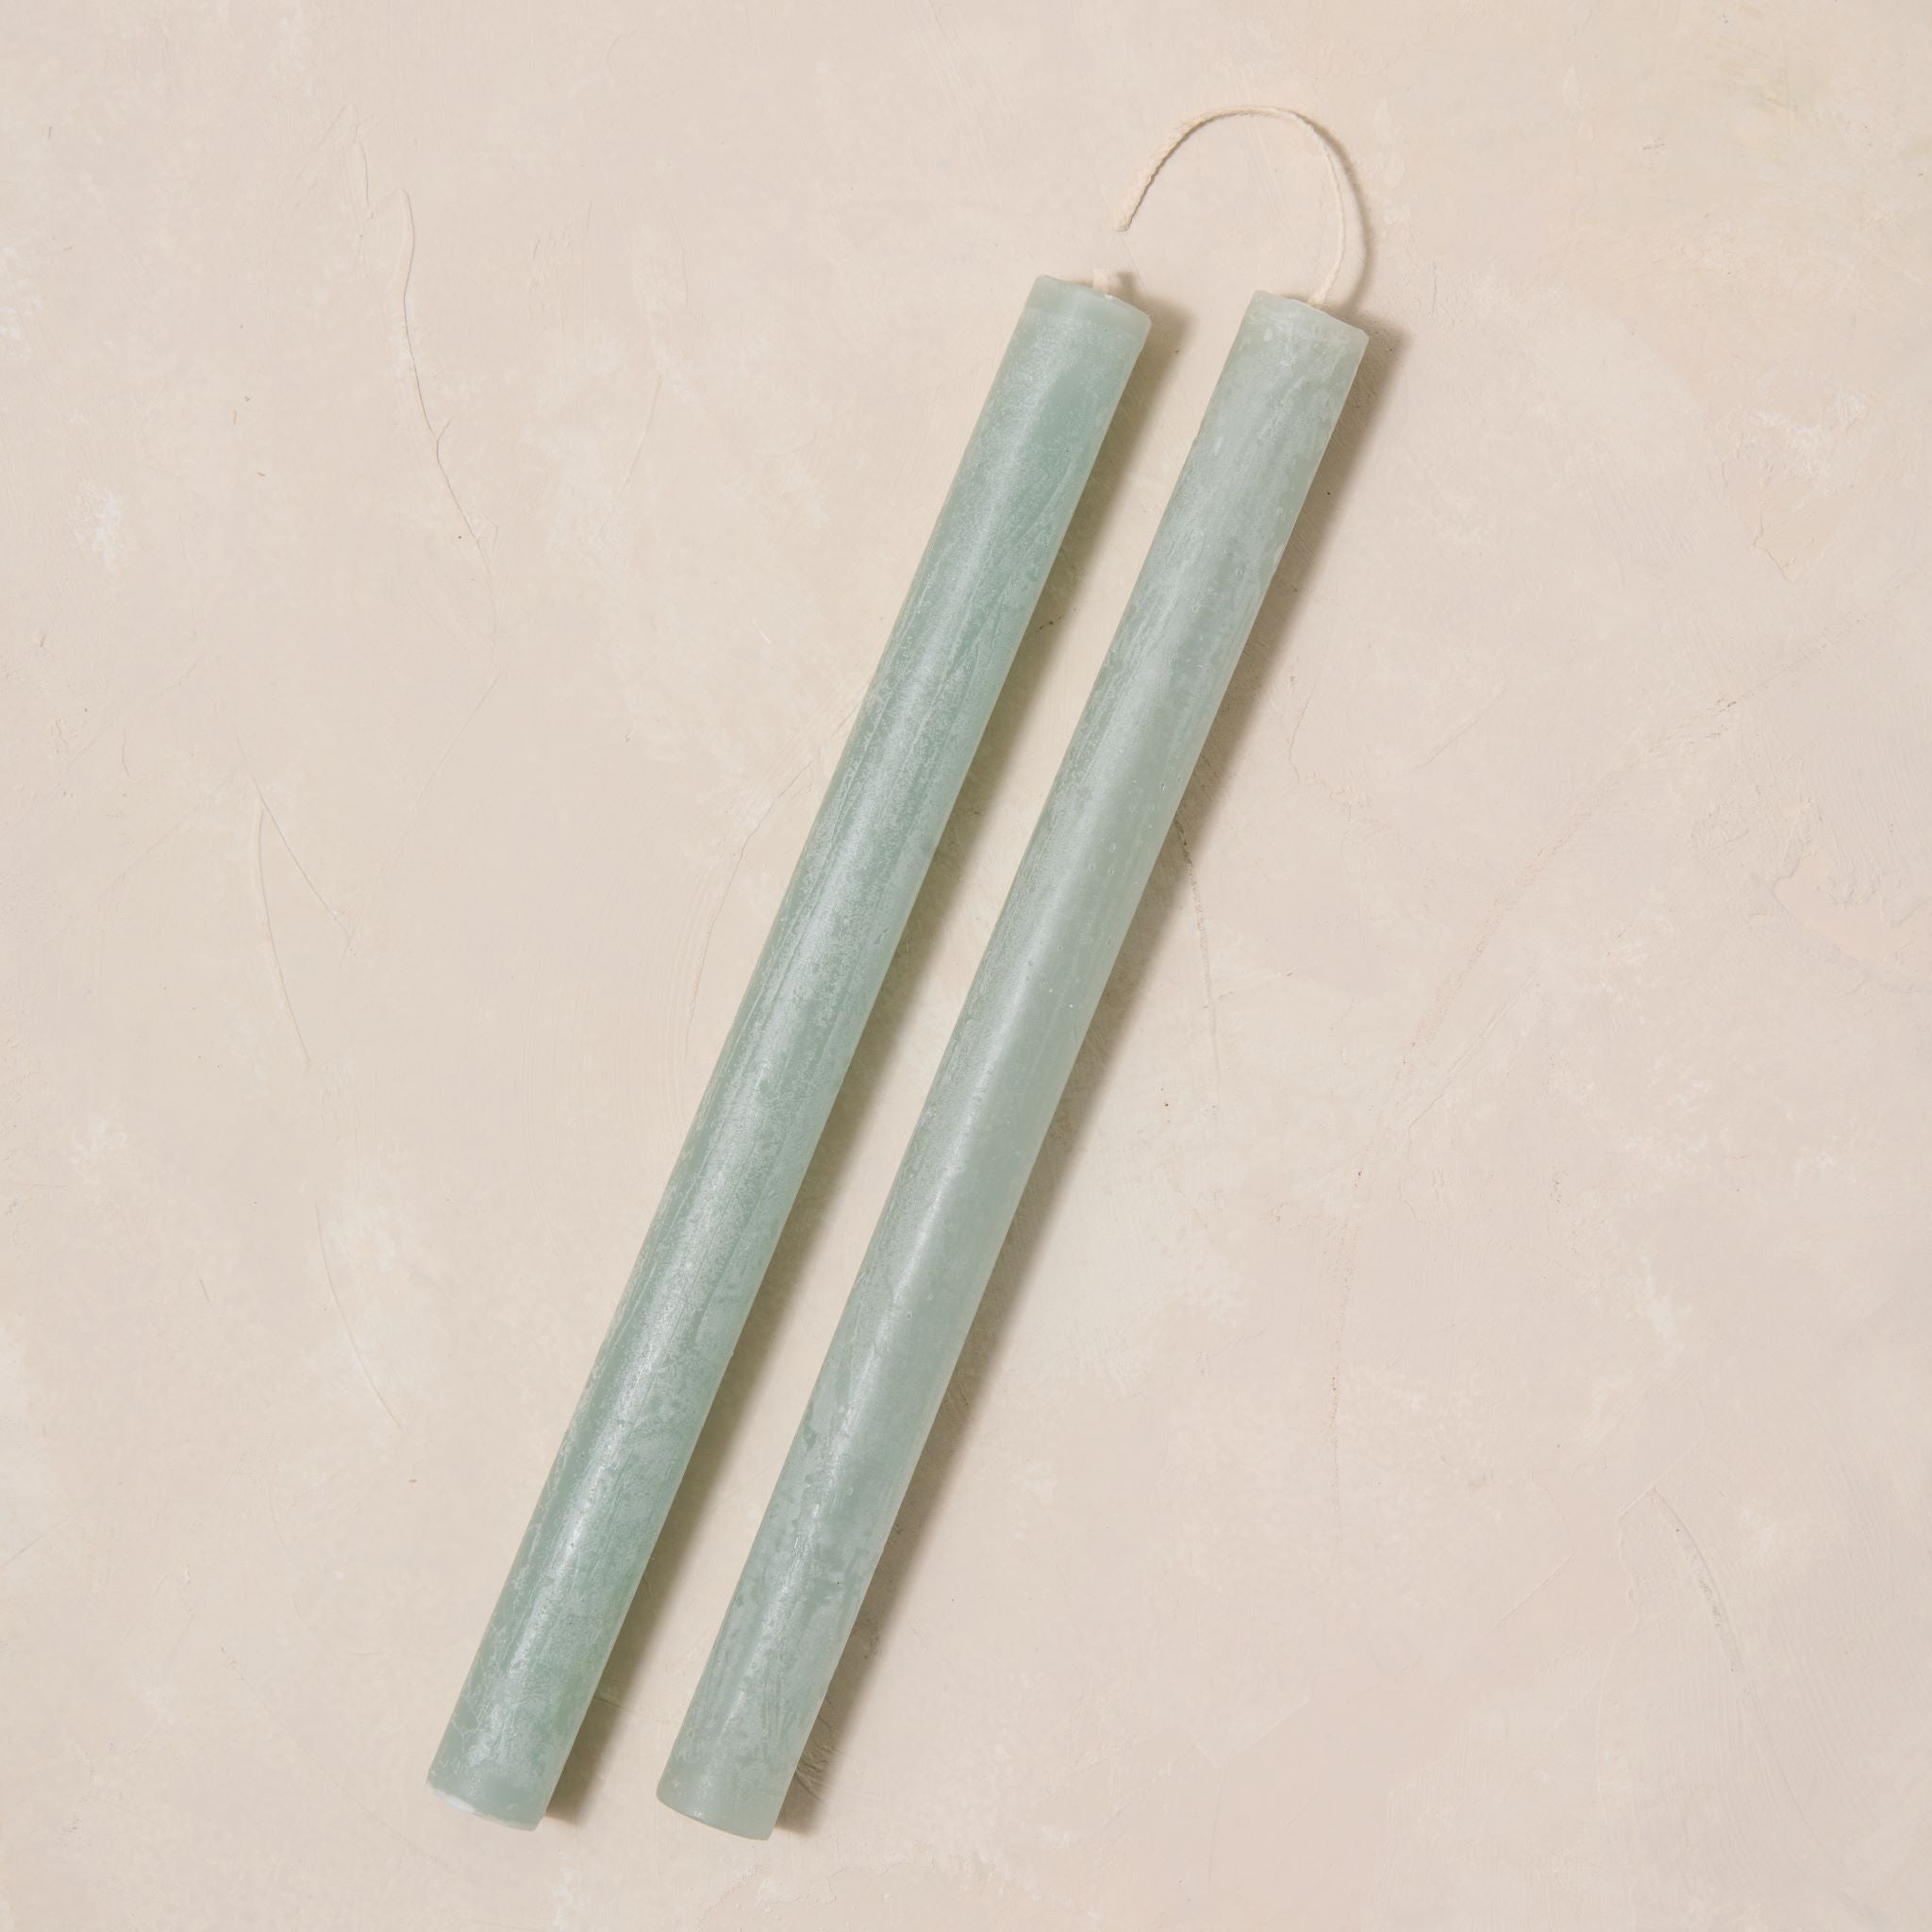 Dark Blue Timber Taper Hanging Pair On sale for $5.60, discounted from $8.00